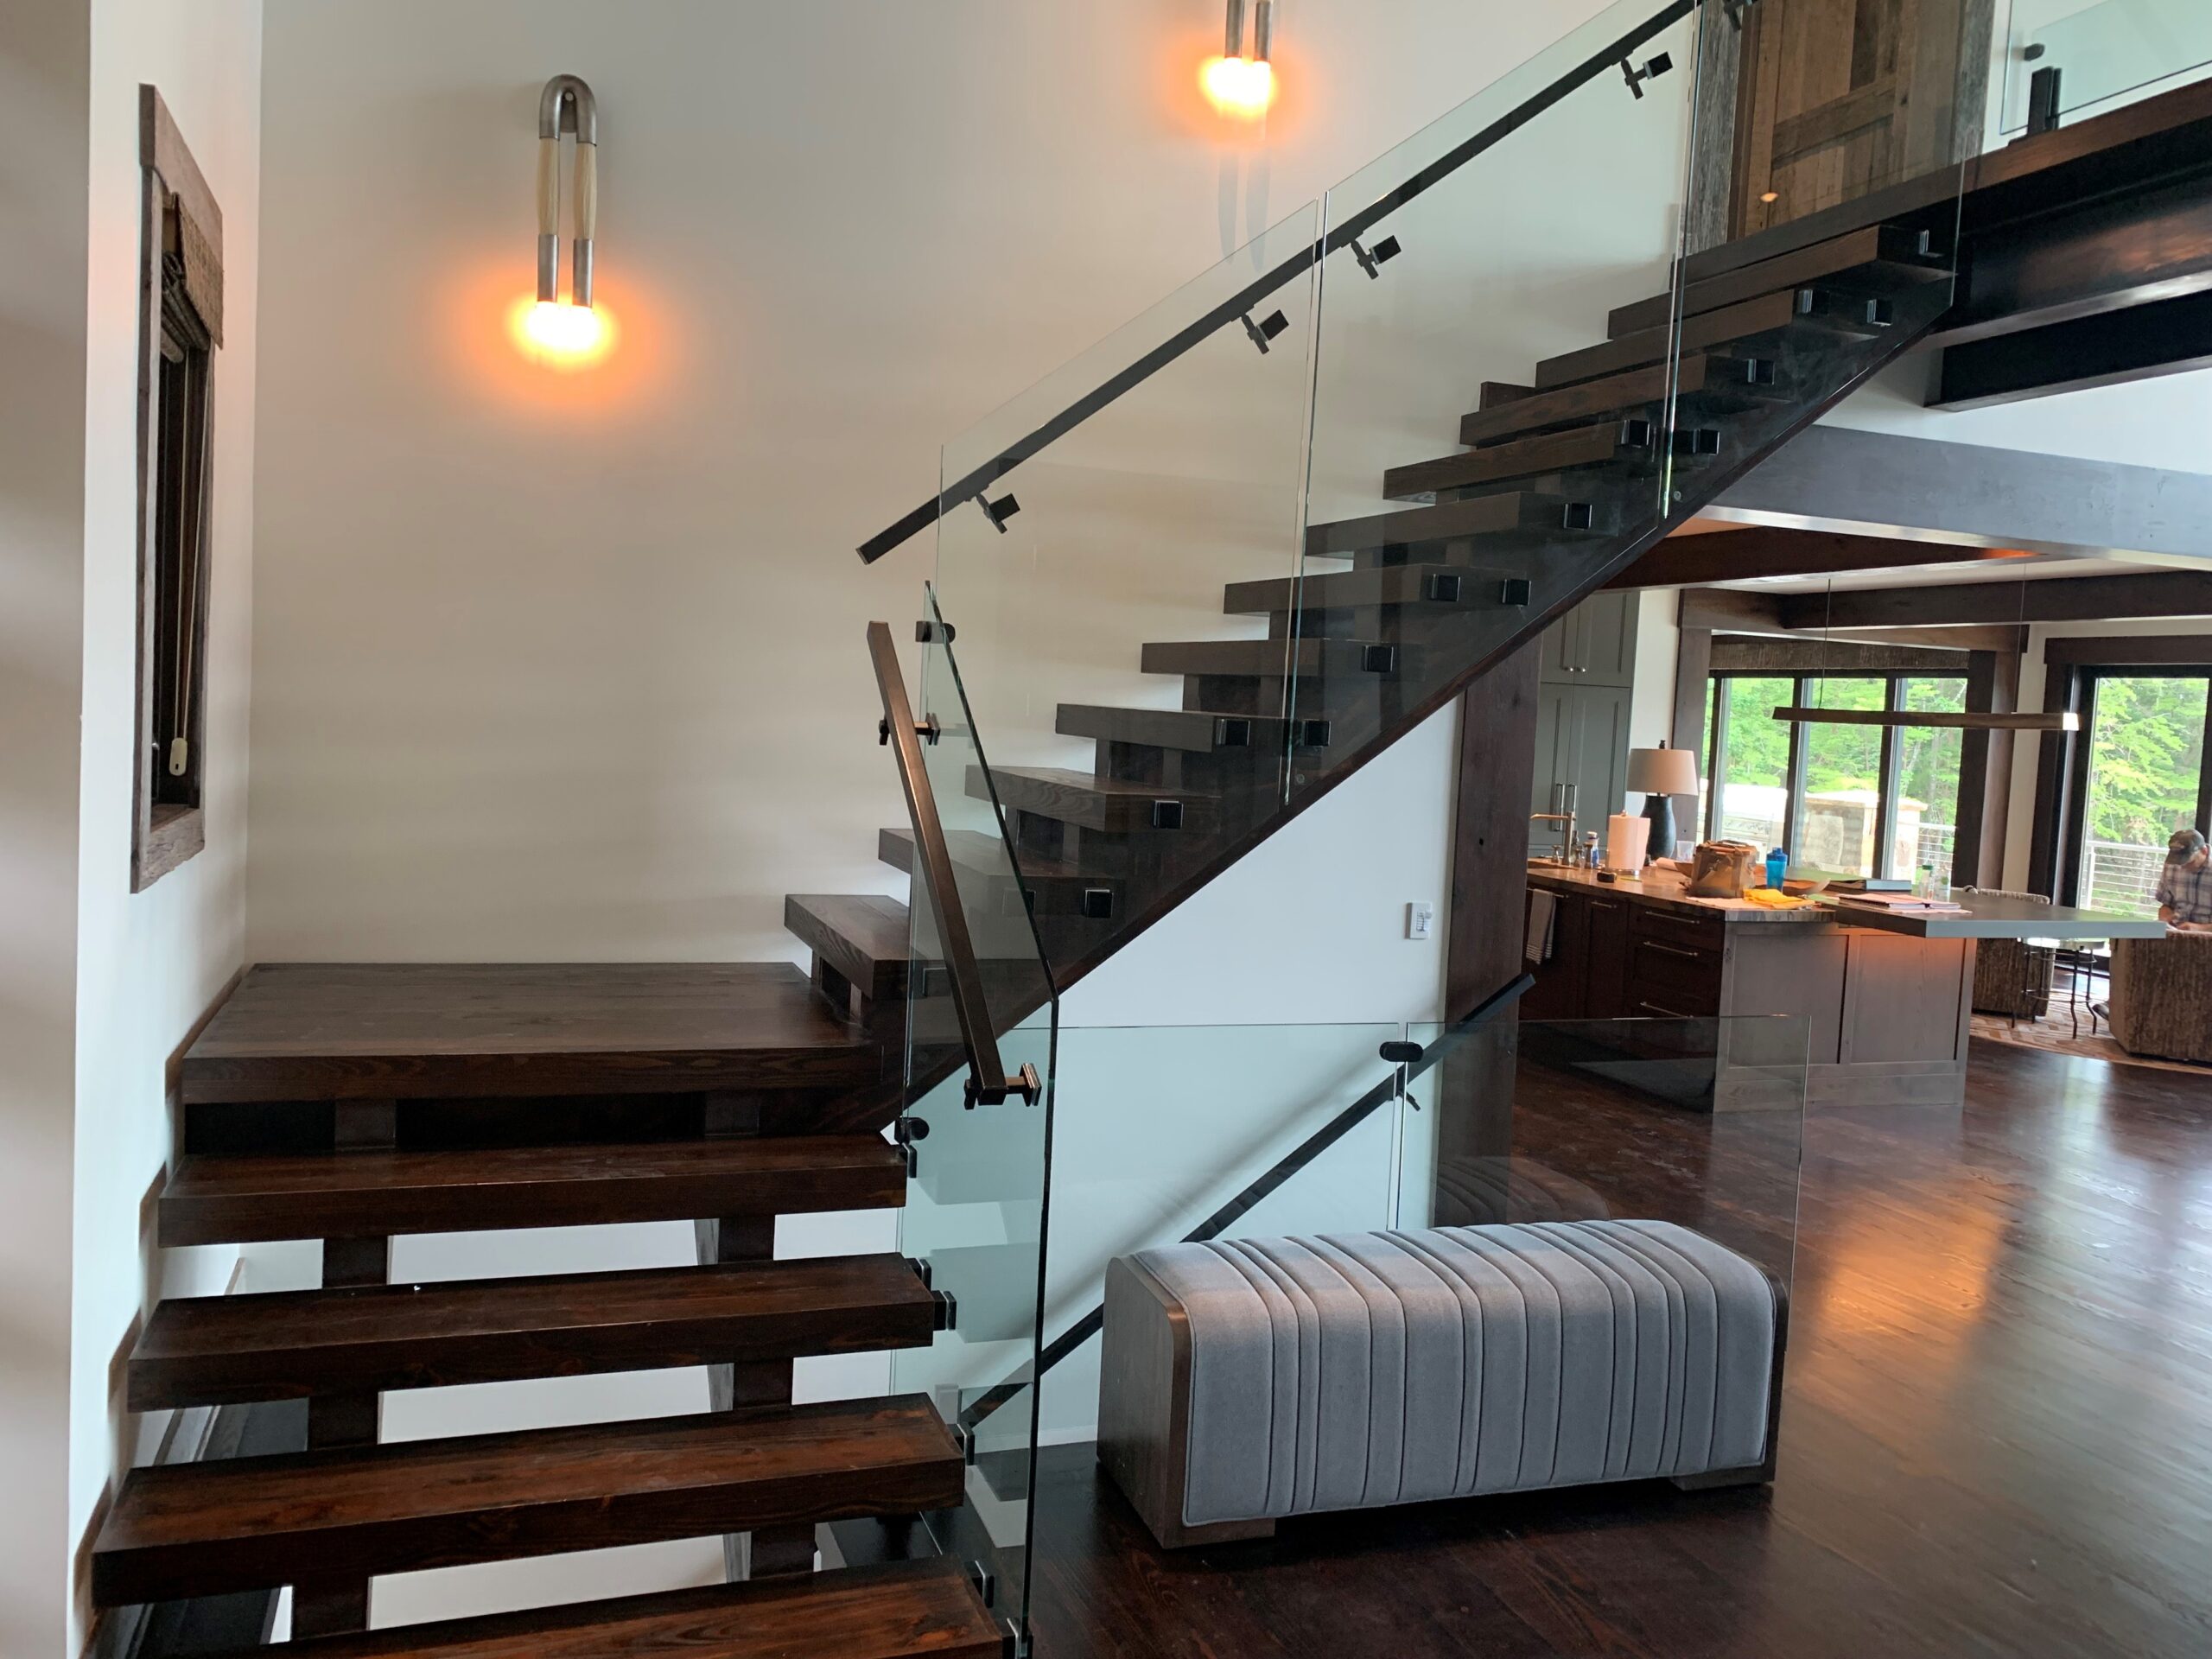 Artistic Stairs Has Custom Stair Designs to Fit Your Architectural Style